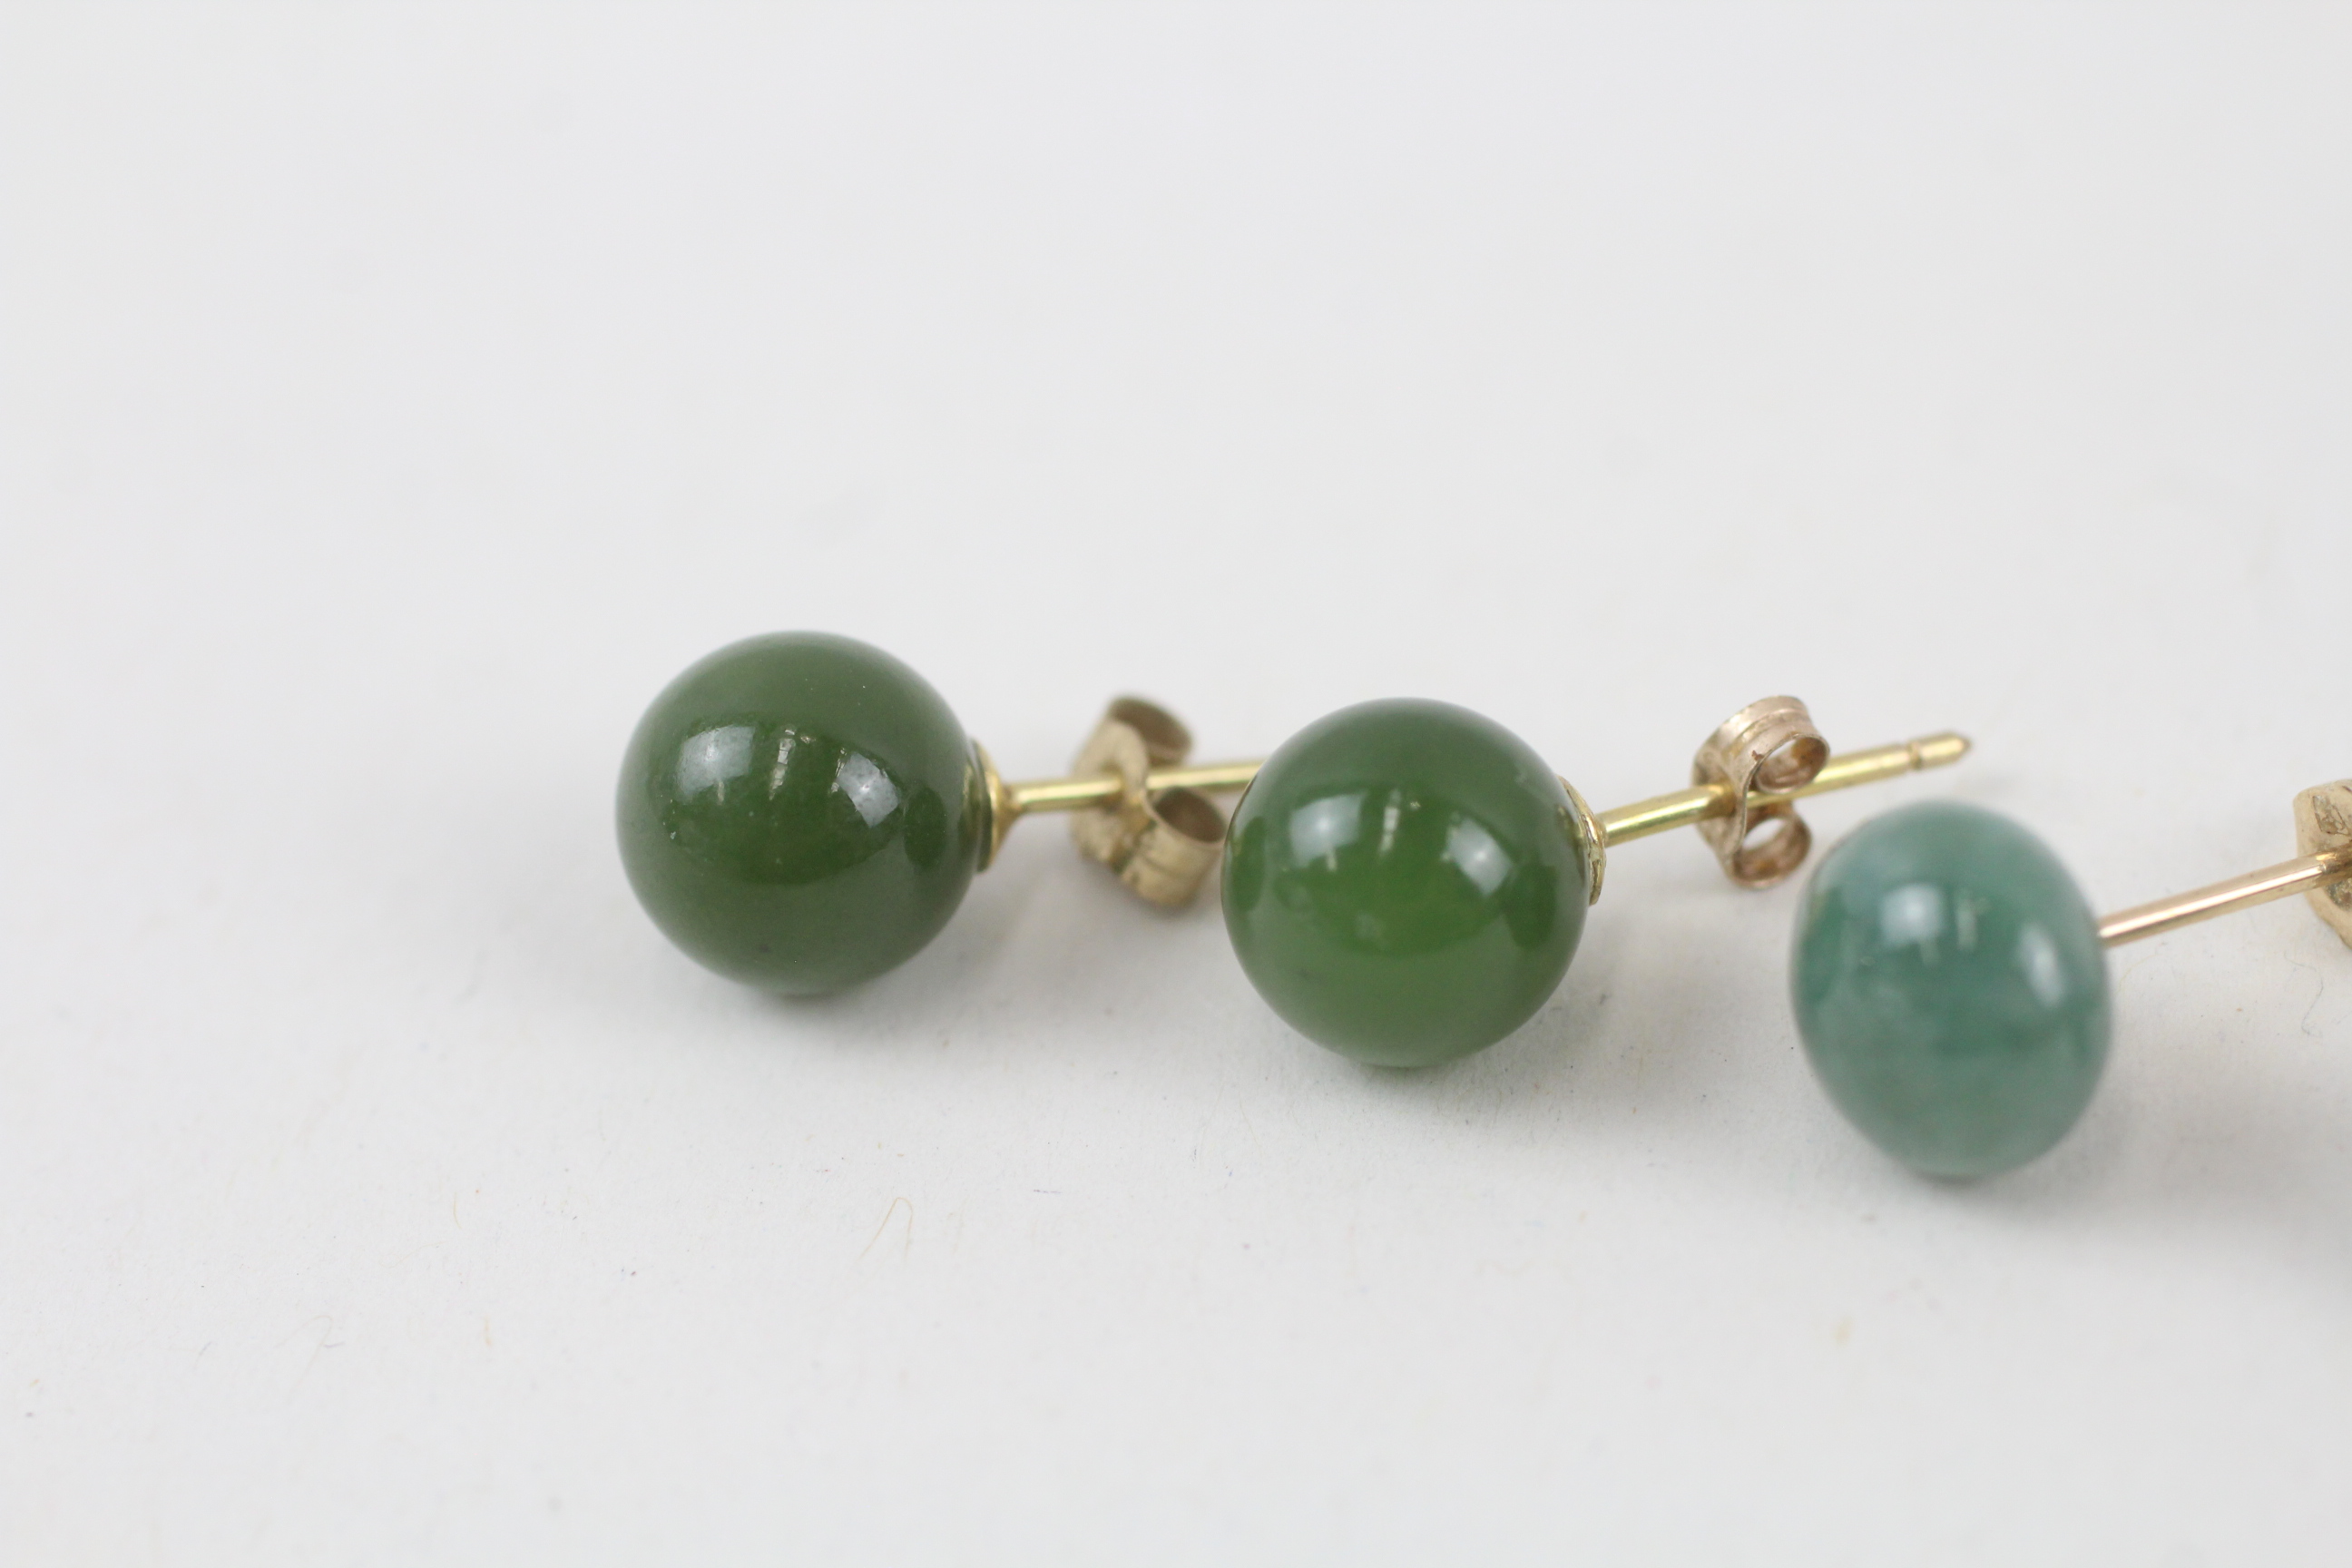 2x 9ct gold nephrite & jade stud earrings with scroll backs - 3.7 g - Image 2 of 6